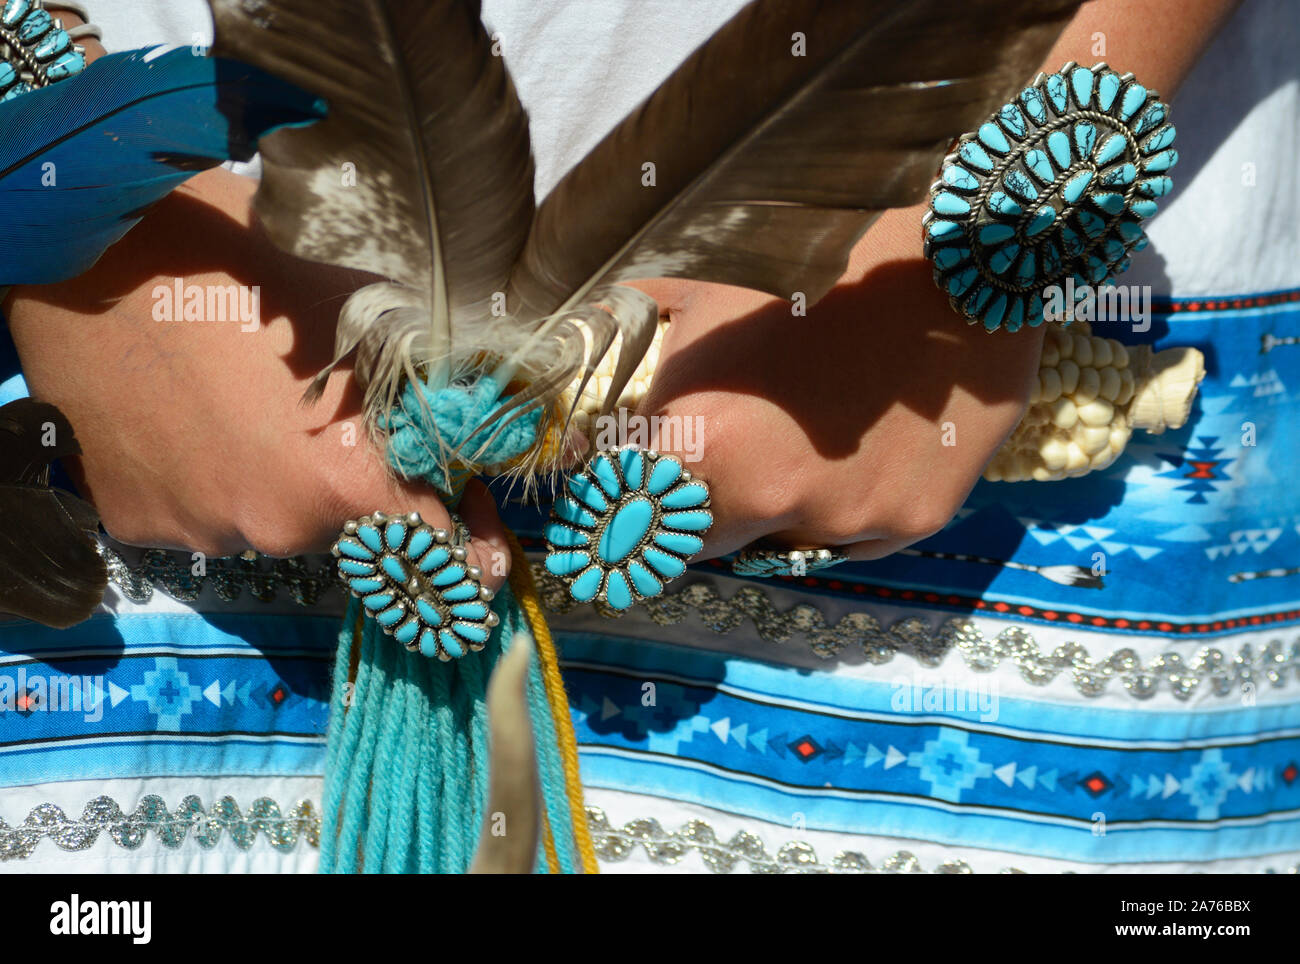 A young Native American woman from the Zuni Pueblo in New Mexico wears traditional petit point cluster turquoise and silver jewelry in Santa Fe, NM Stock Photo